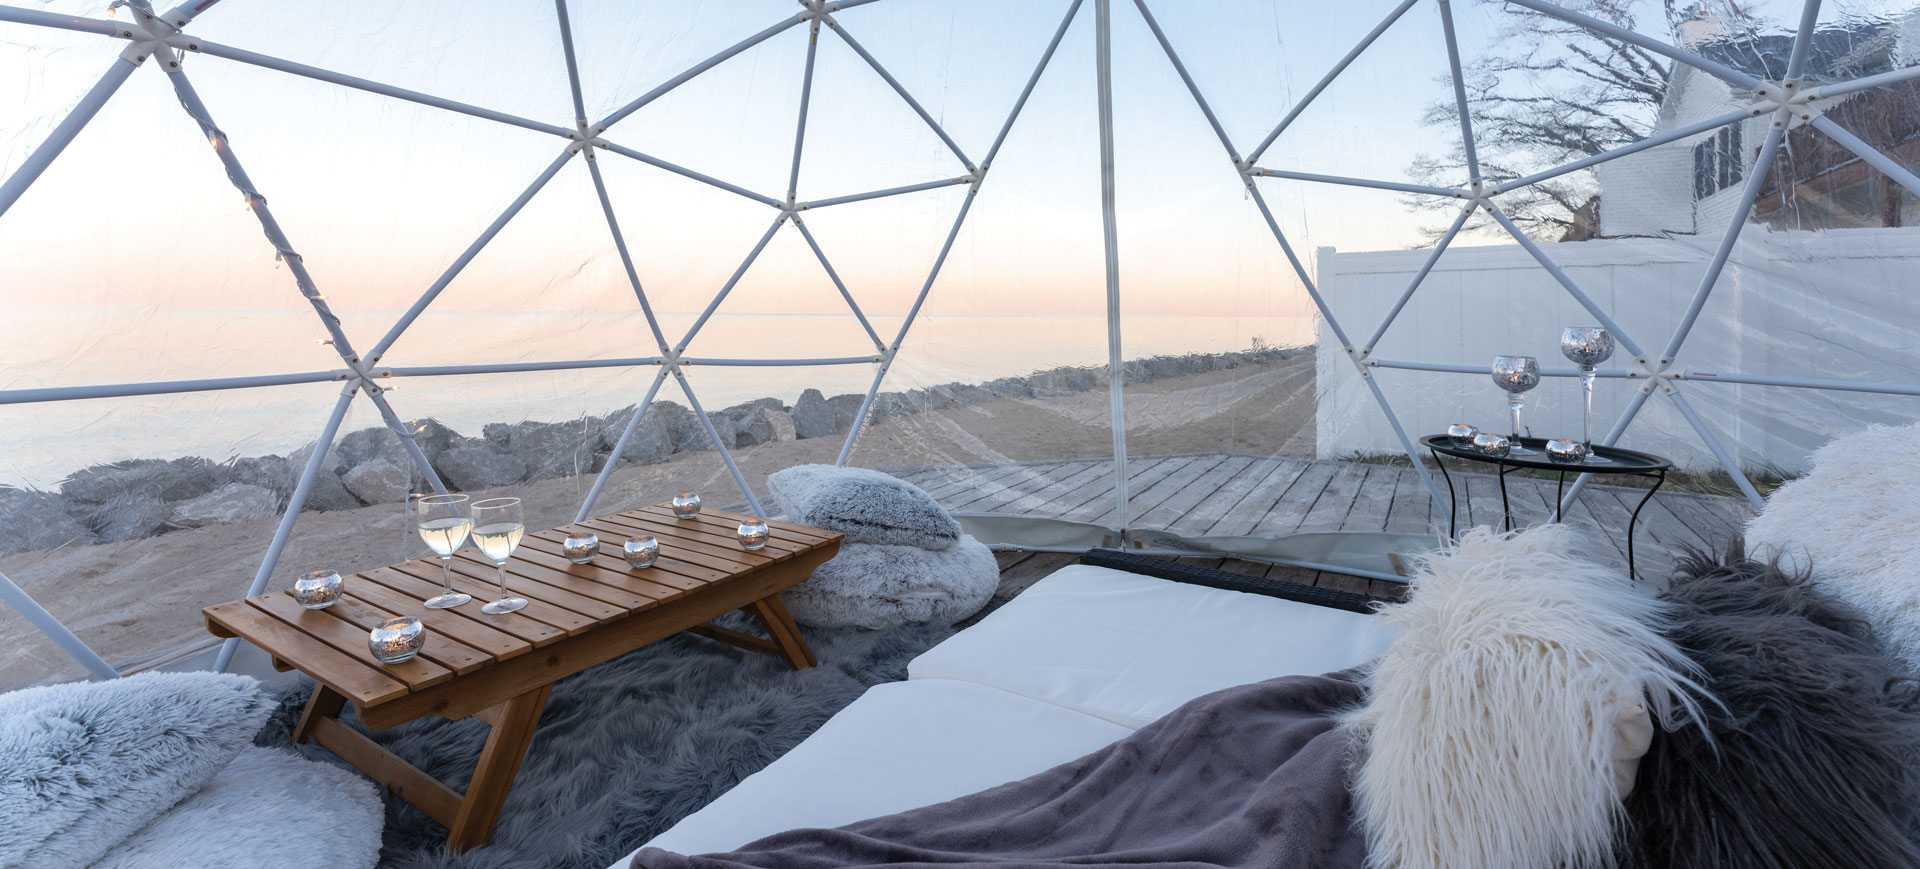 The beachside igloos on Lake Huron are a unique experience while stay at the Huron House Luxury Bed & Breakfast